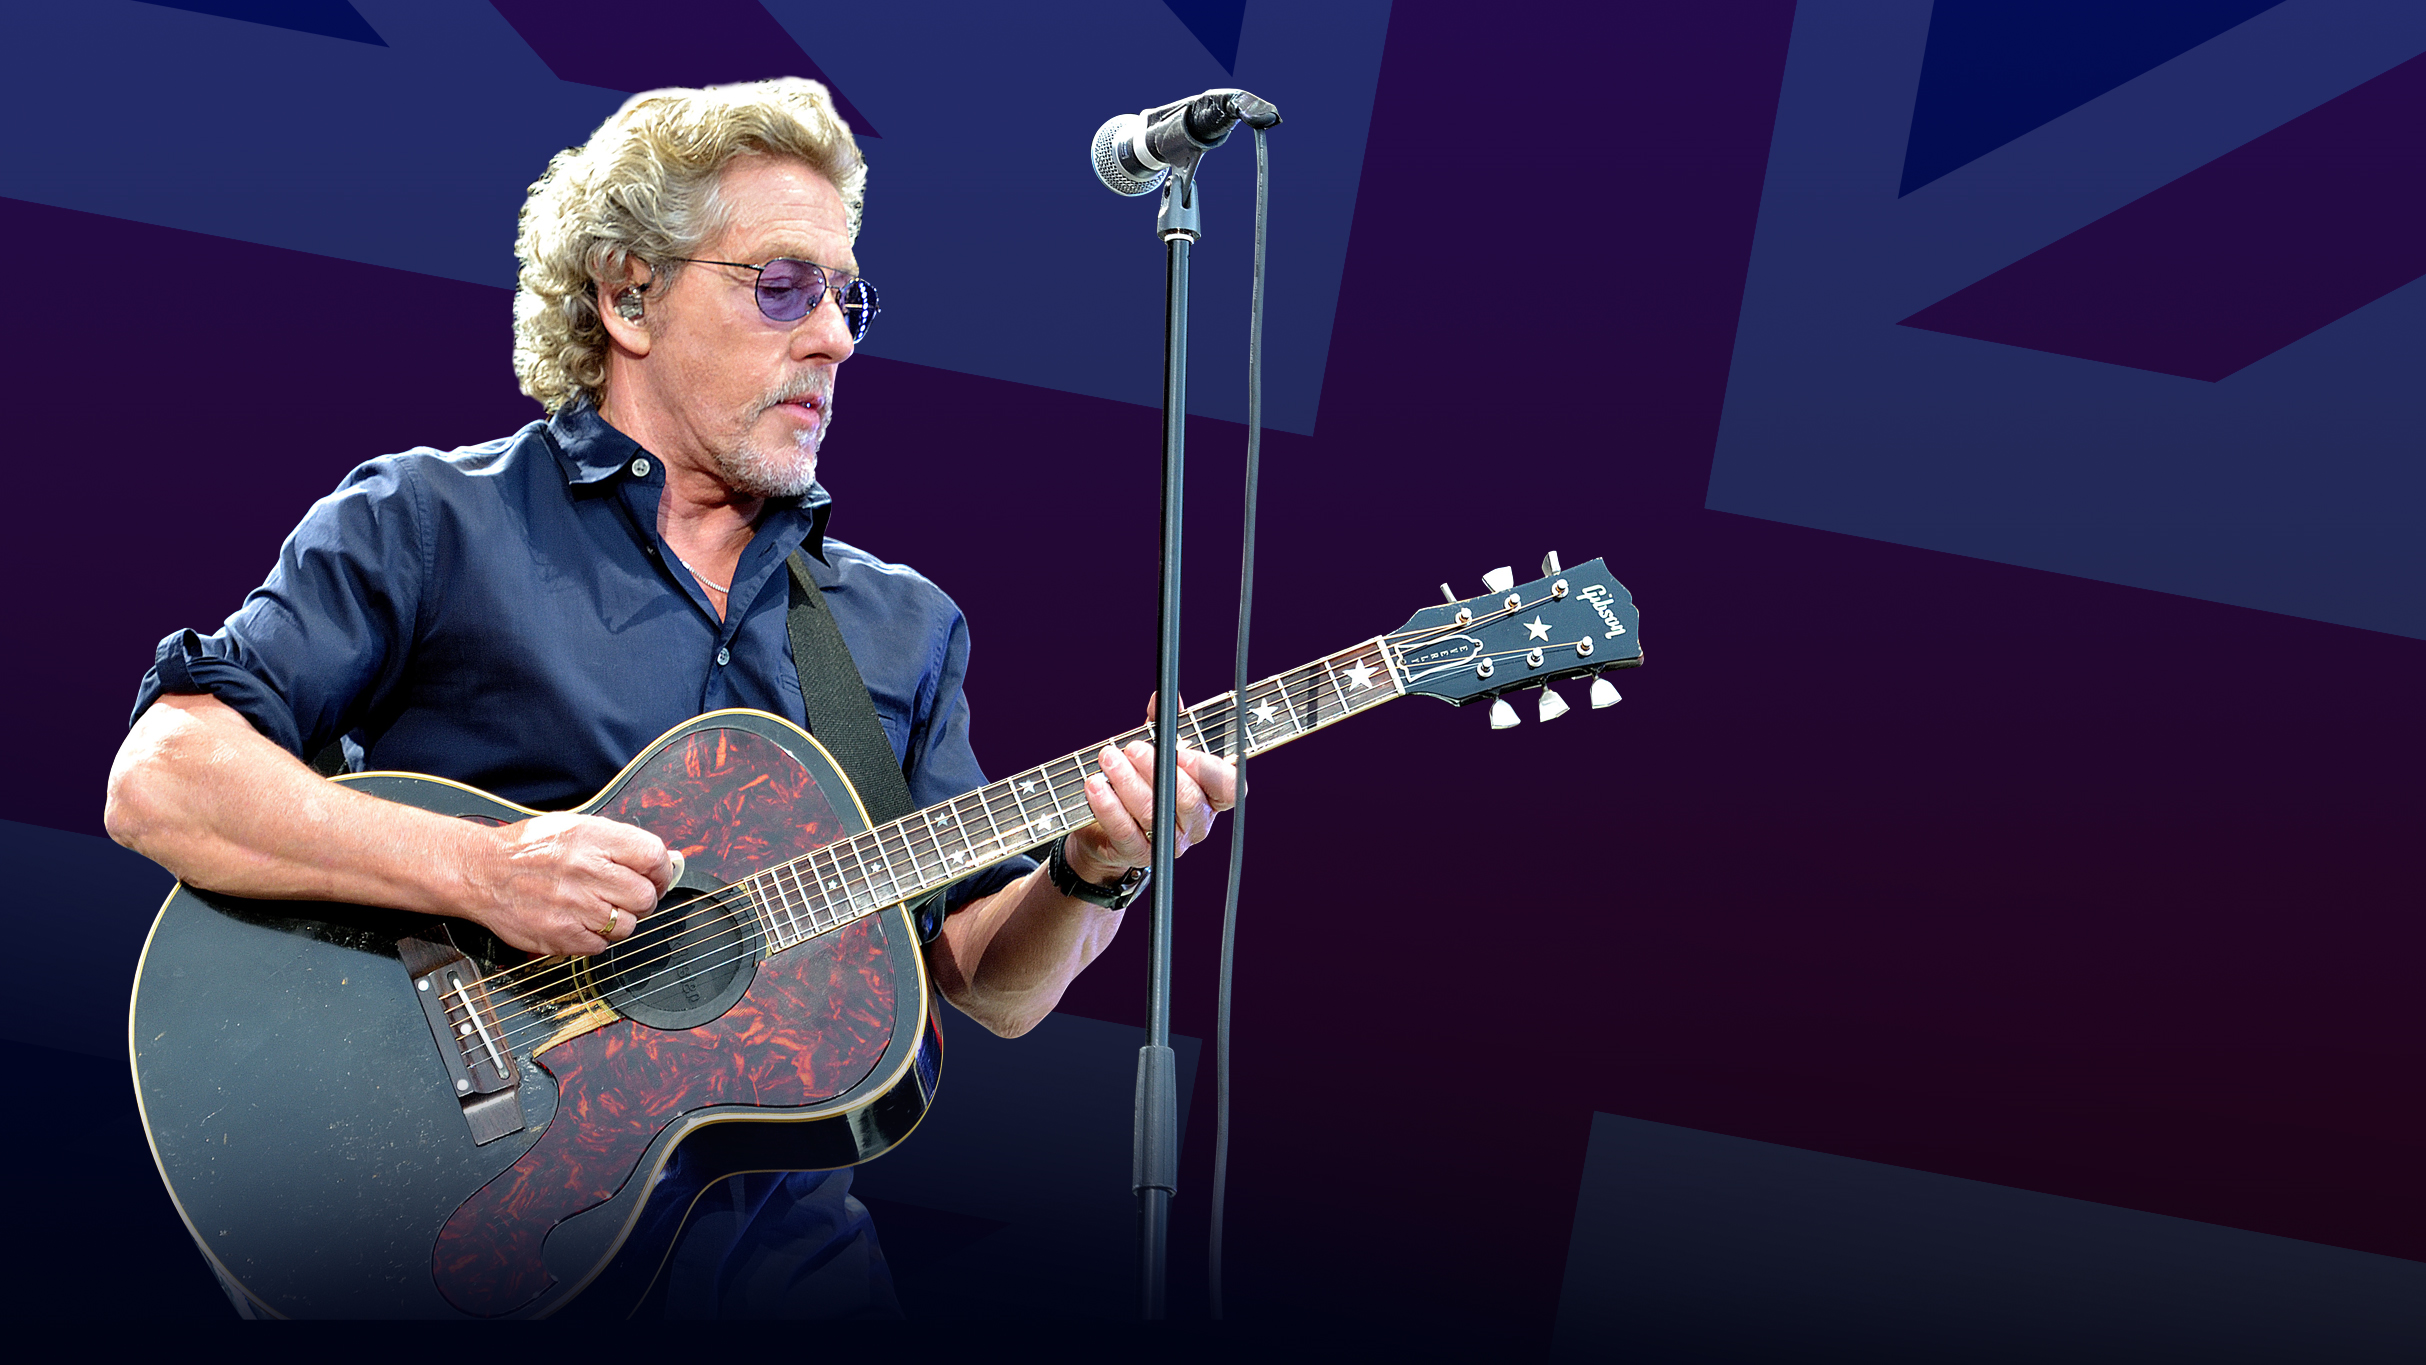 Roger Daltrey with Kt Tunstall pre-sale password for approved tickets in Niagara Falls